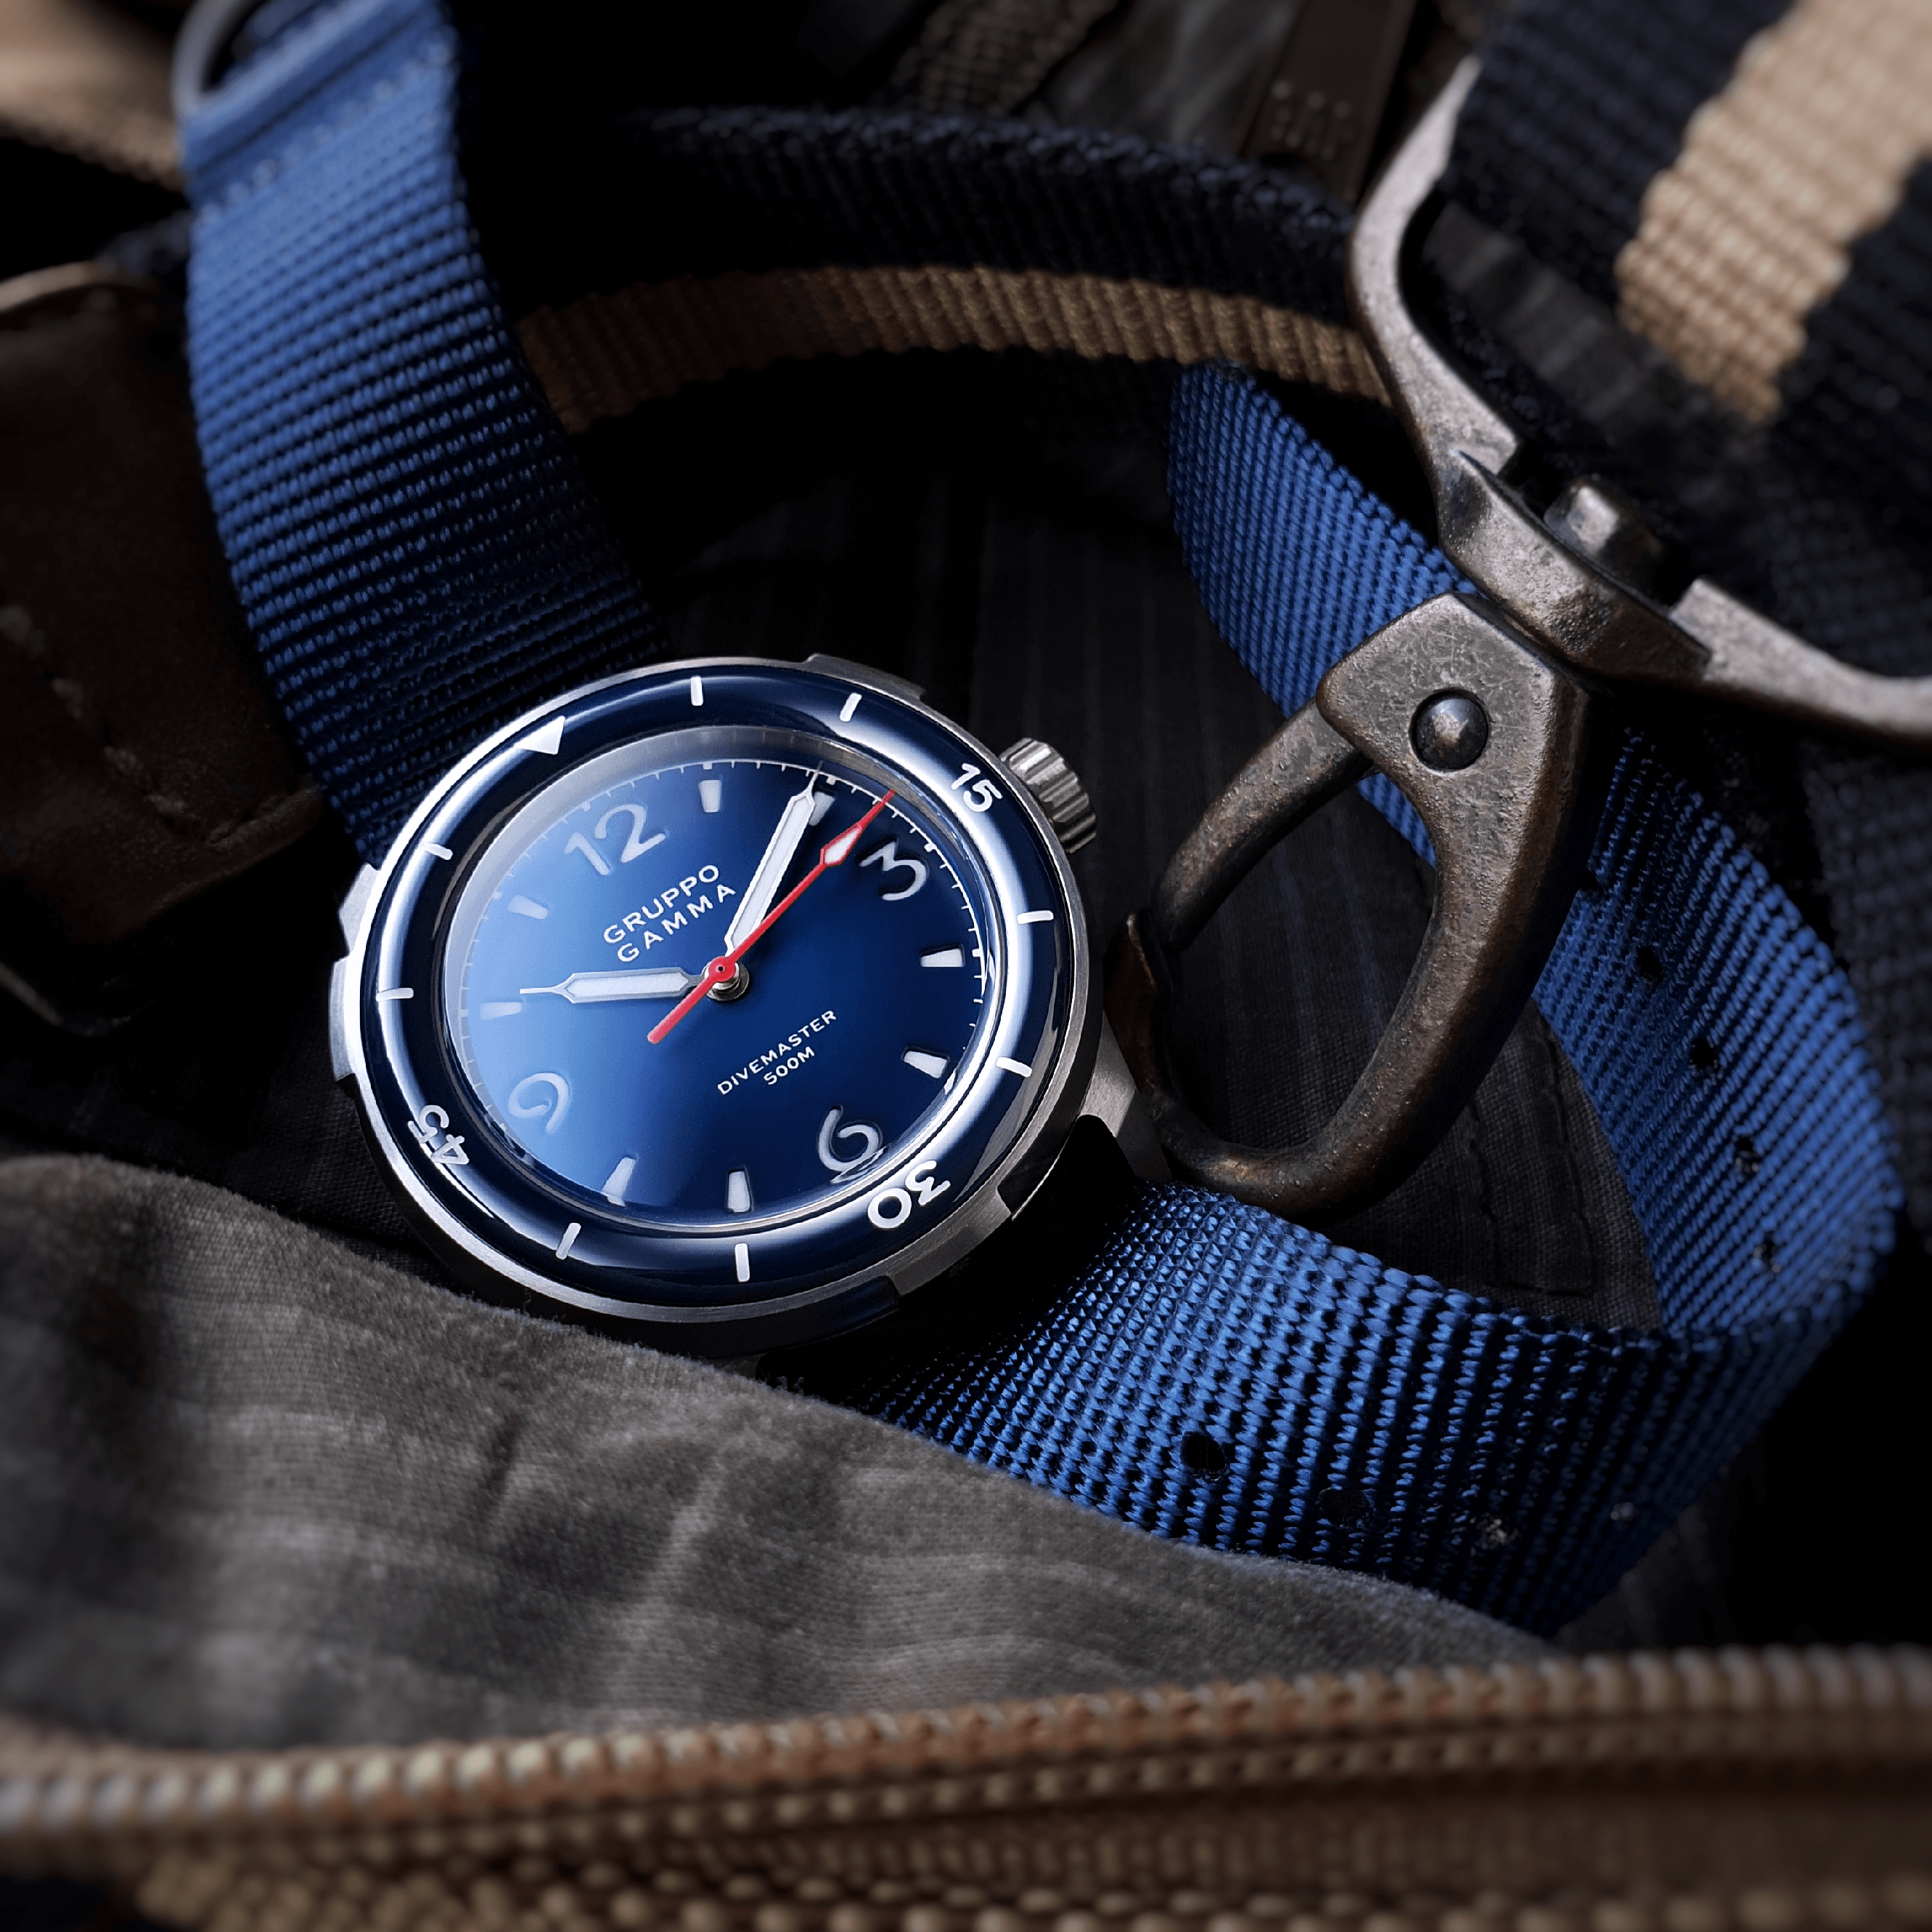 Stunning photography of our ballistic nylon strap with Gruppo Gamma by @dp.graphics